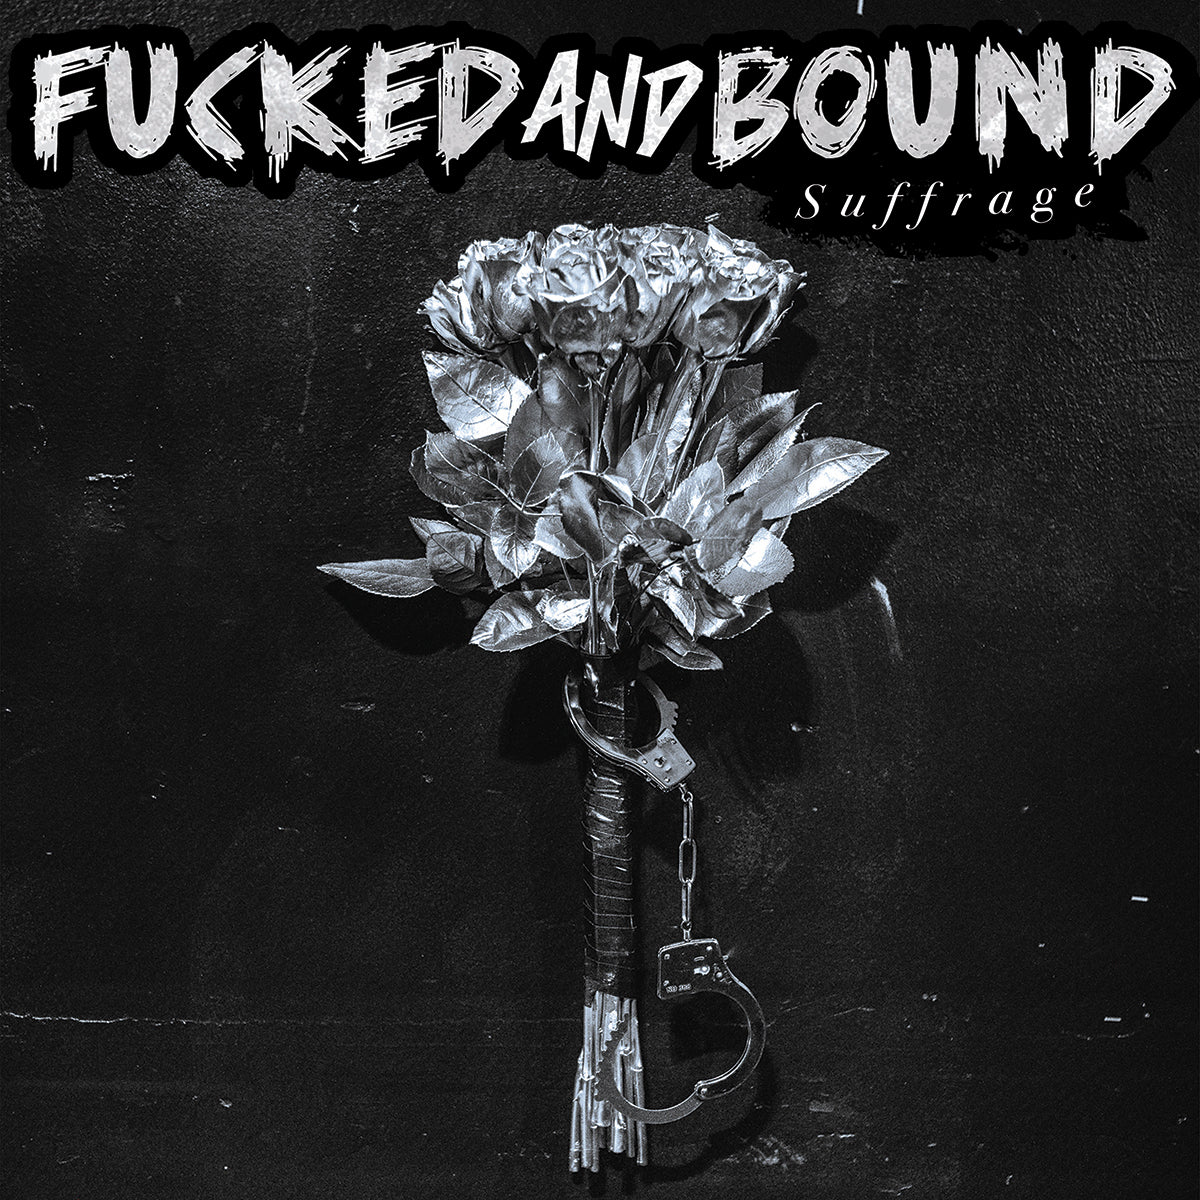 FUCKED AND BOUND "Suffrage" LP